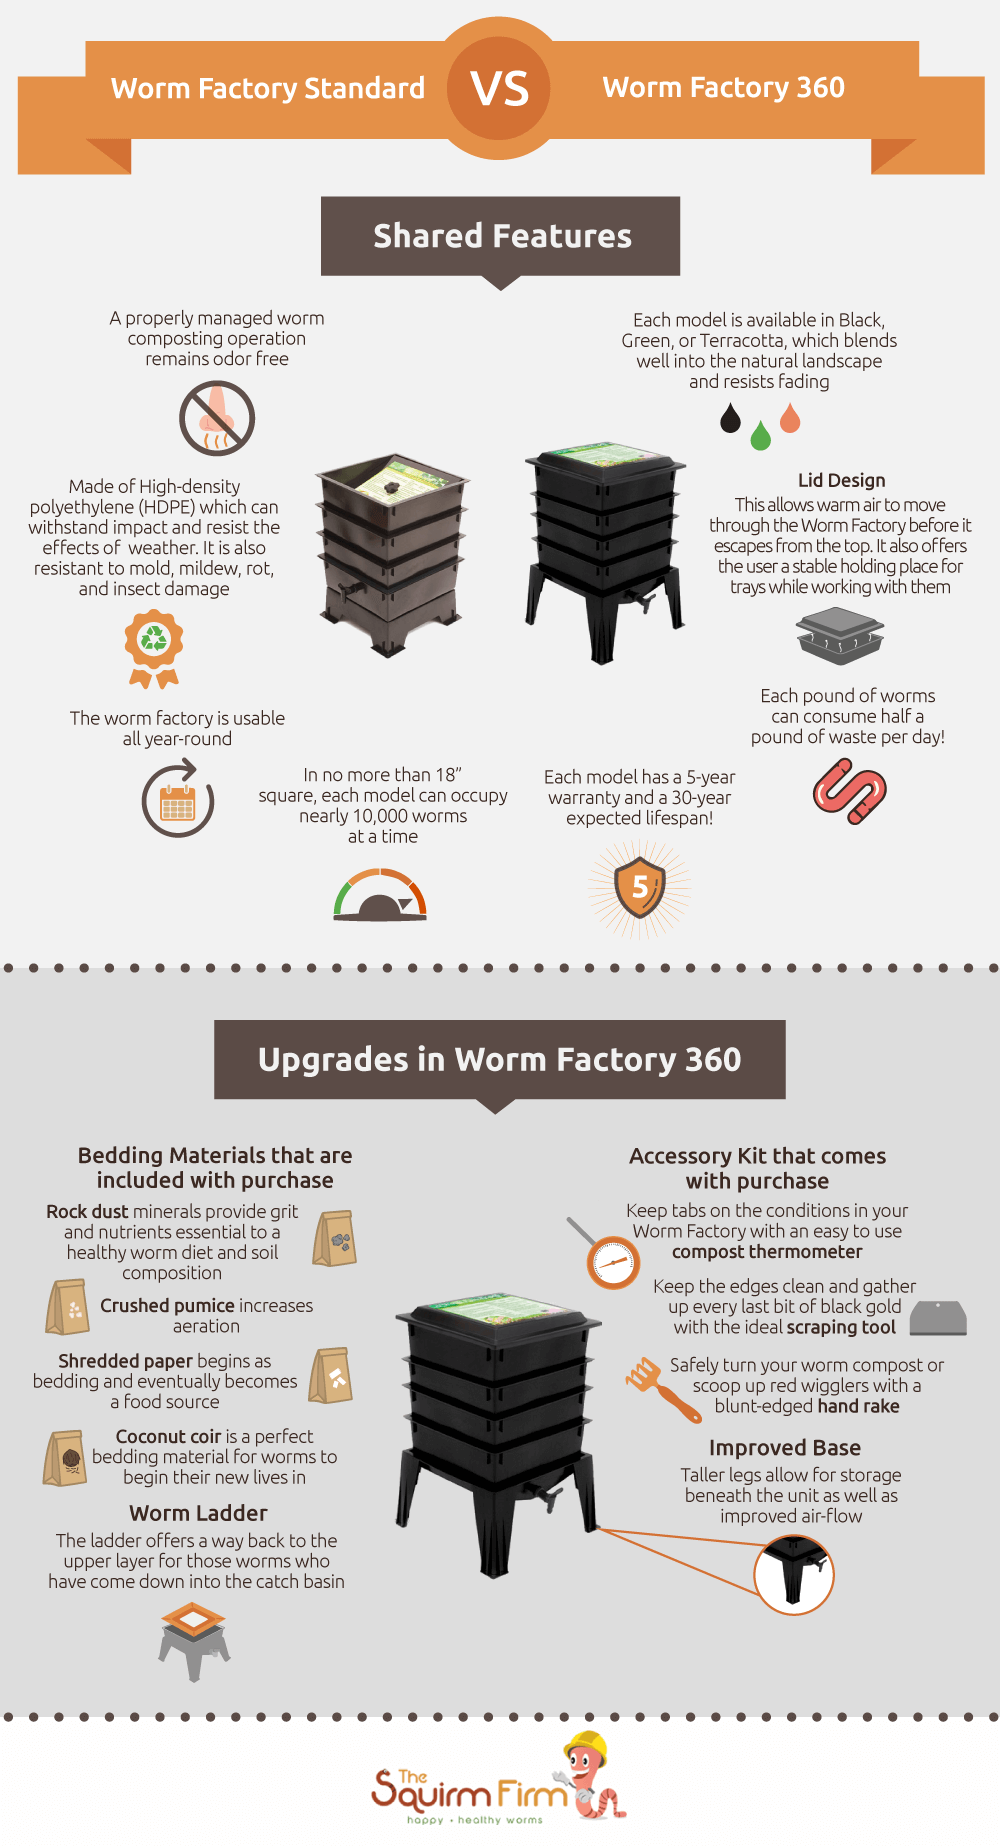 Worm Factory Vs. Worm Factory 360 Infographic updated